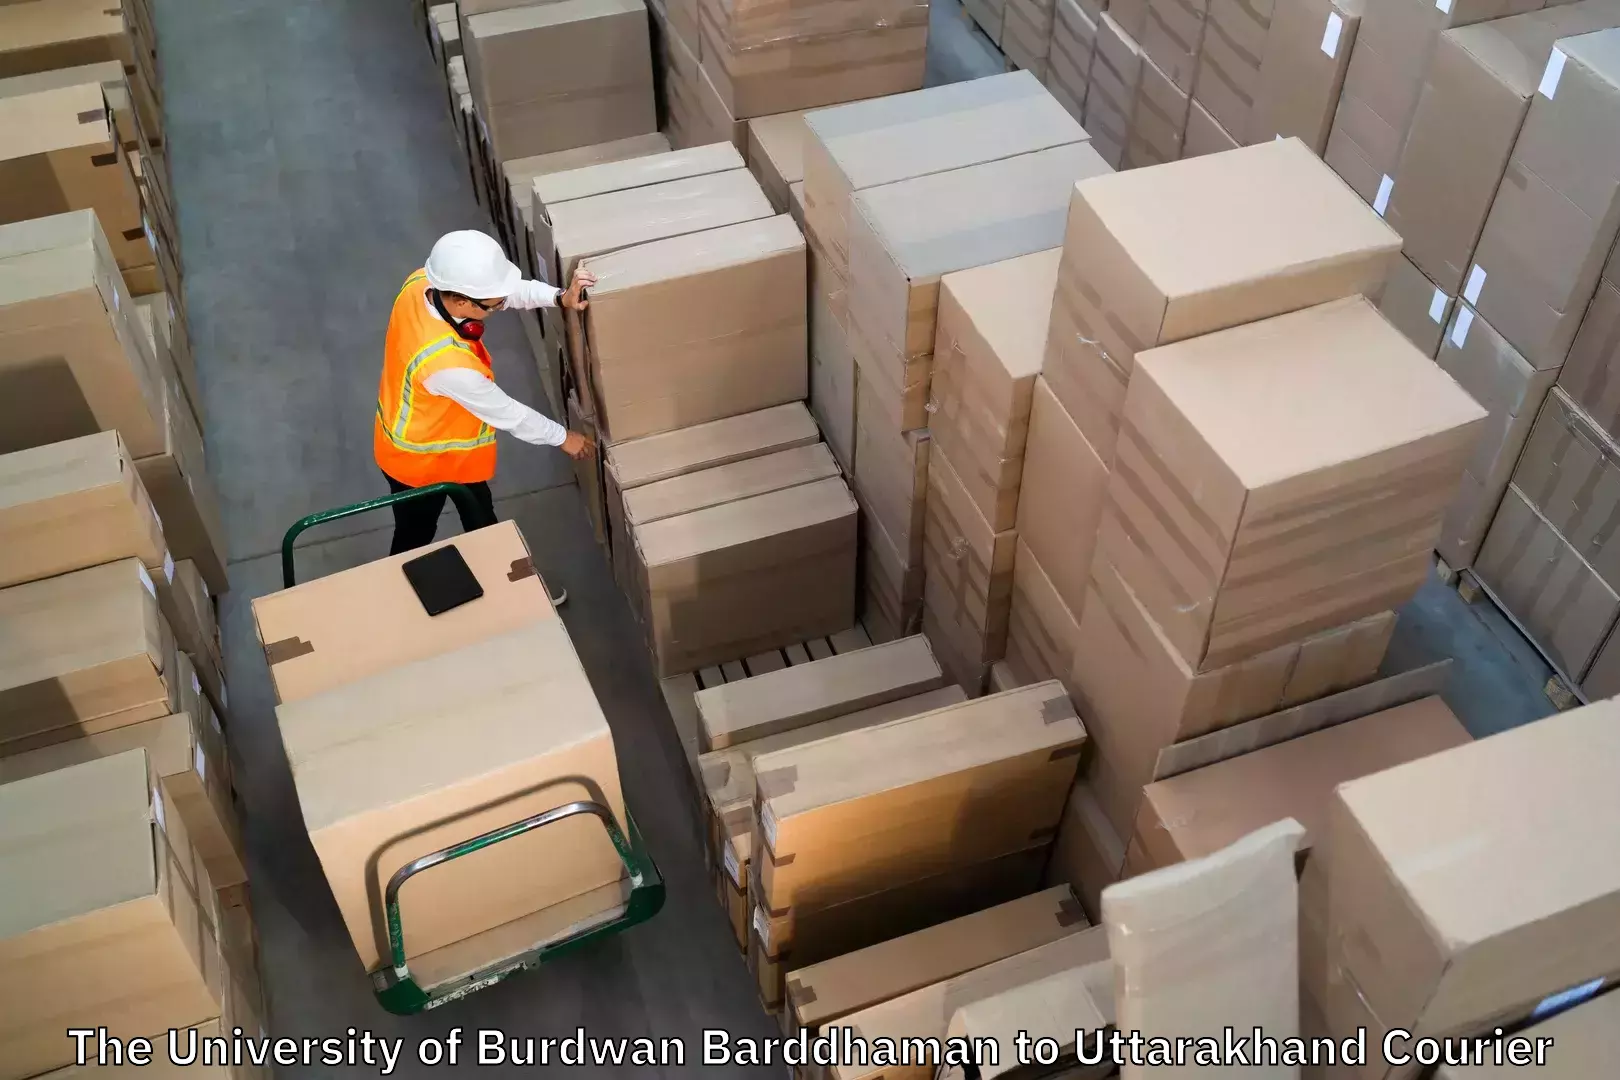 Baggage delivery support The University of Burdwan Barddhaman to Doiwala